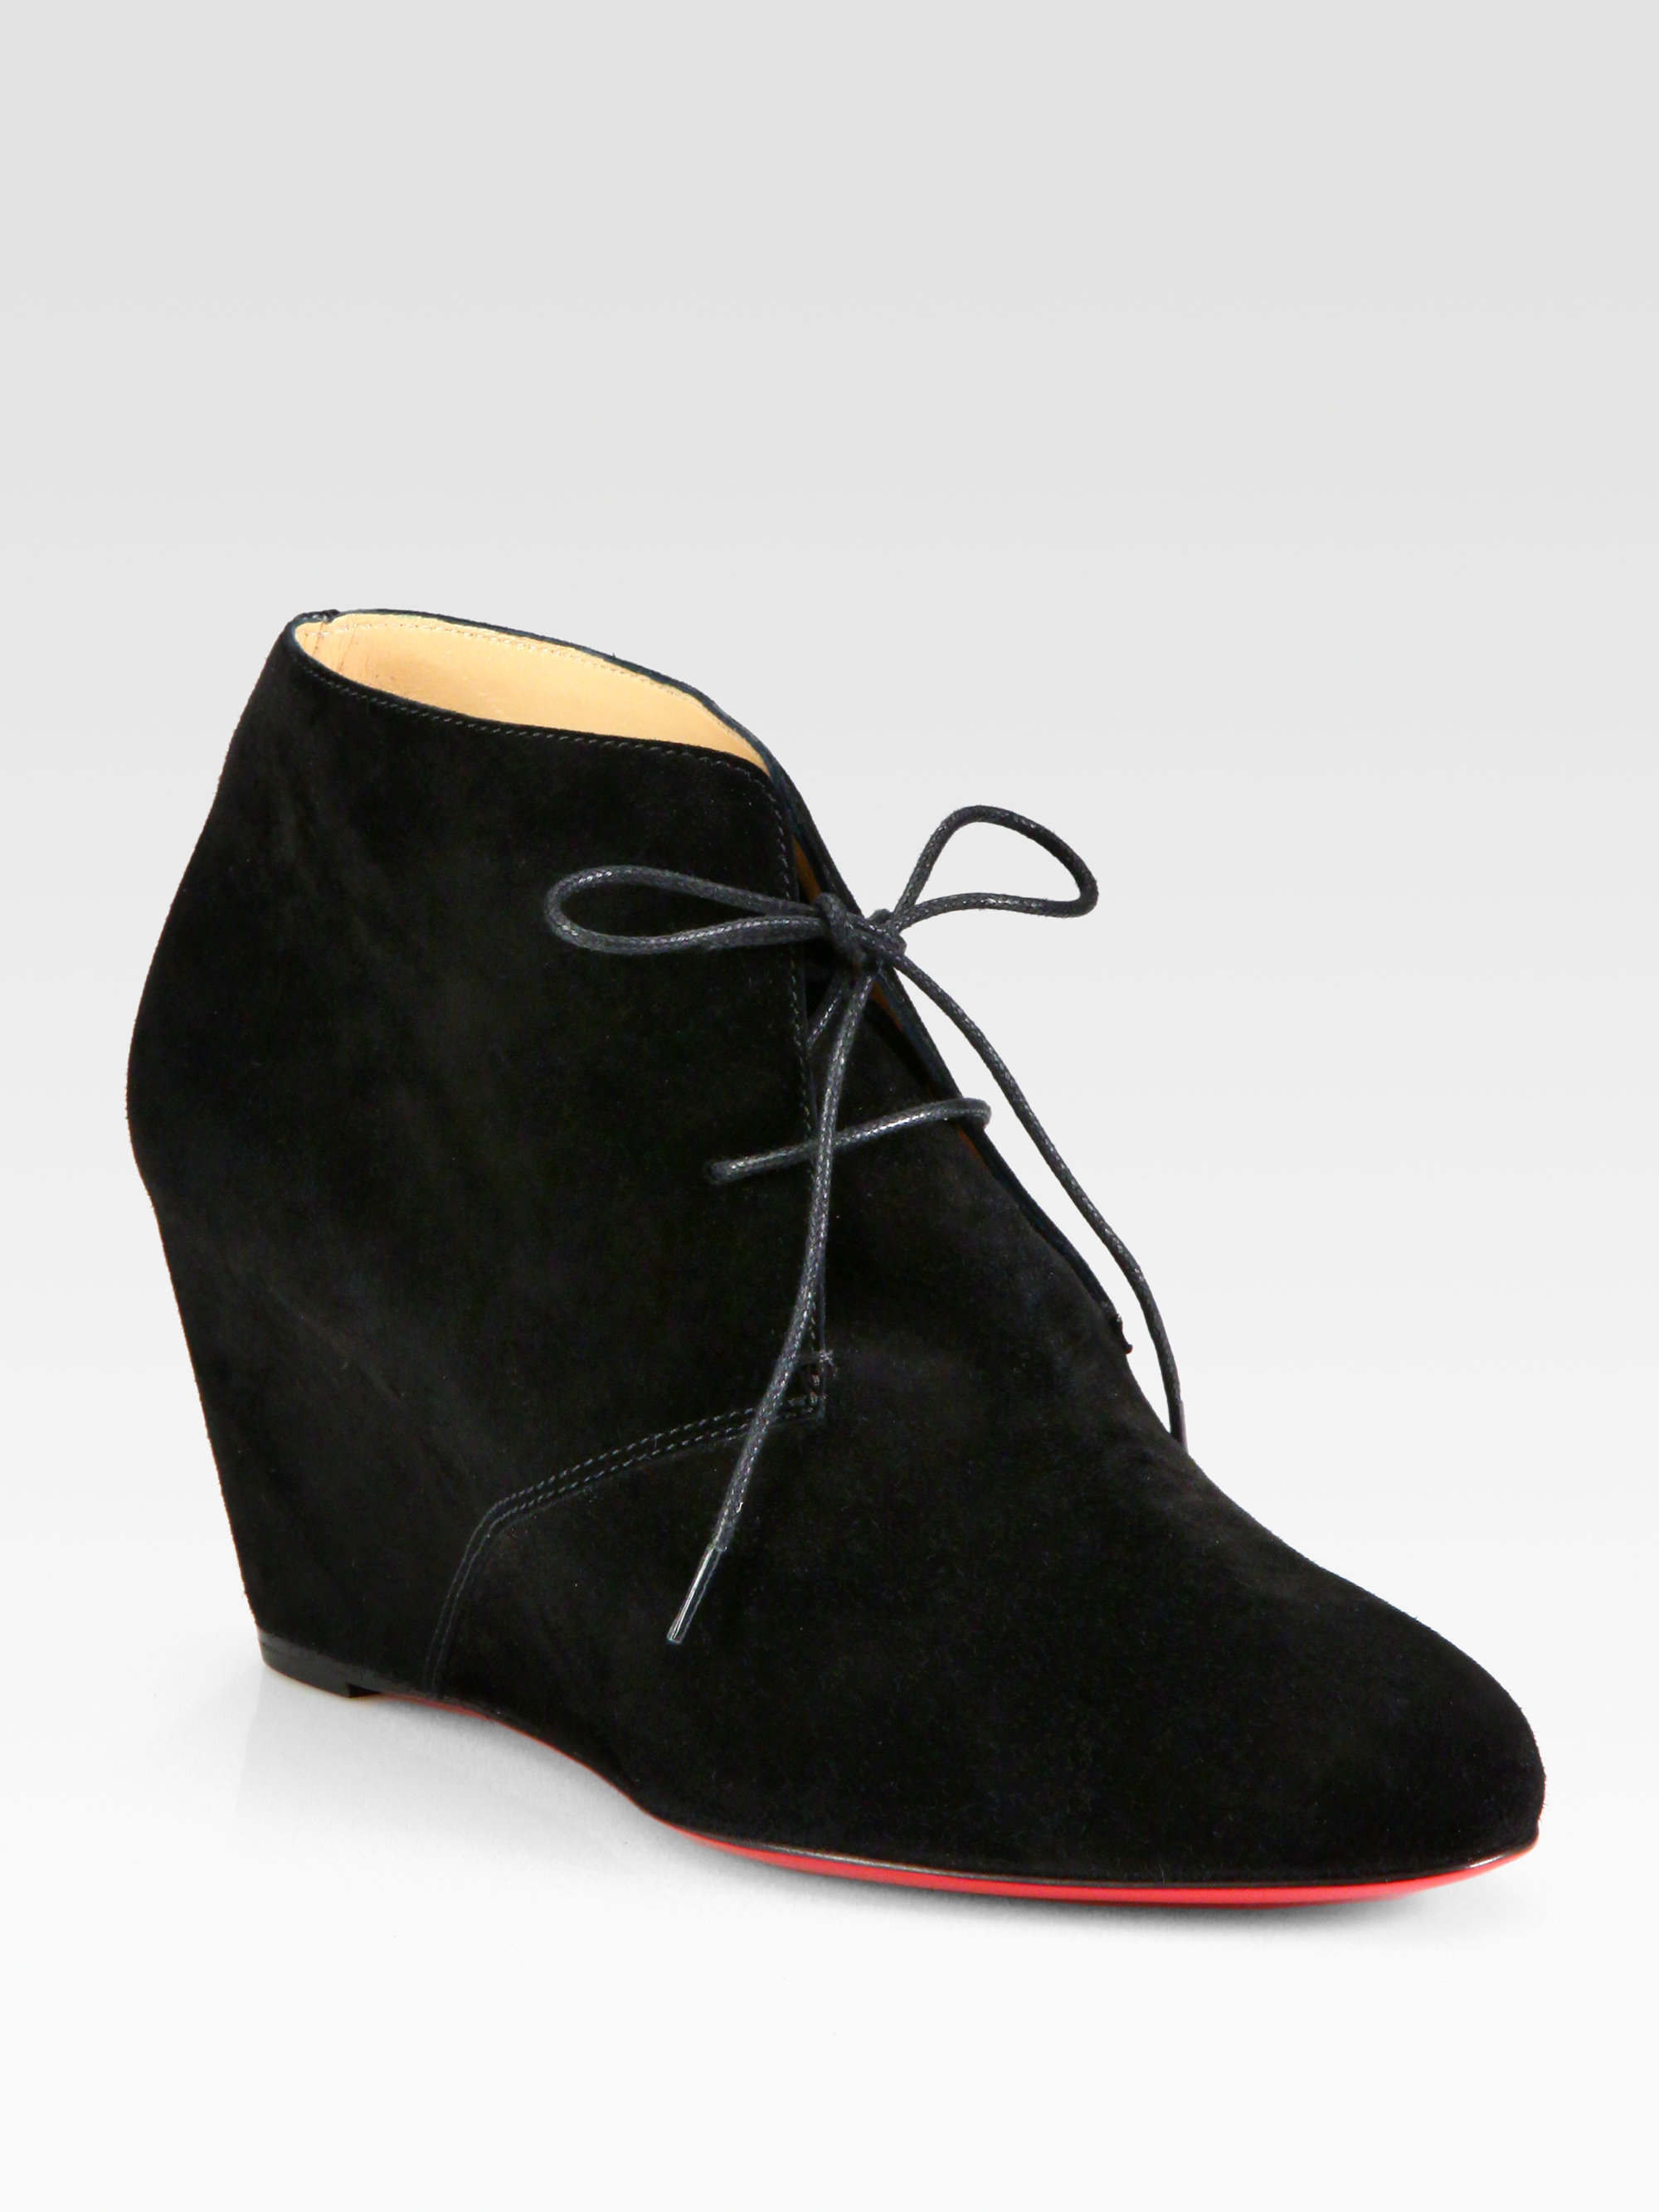 Christian louboutin Laceup Suede Wedge Ankle Boots in Black | Lyst